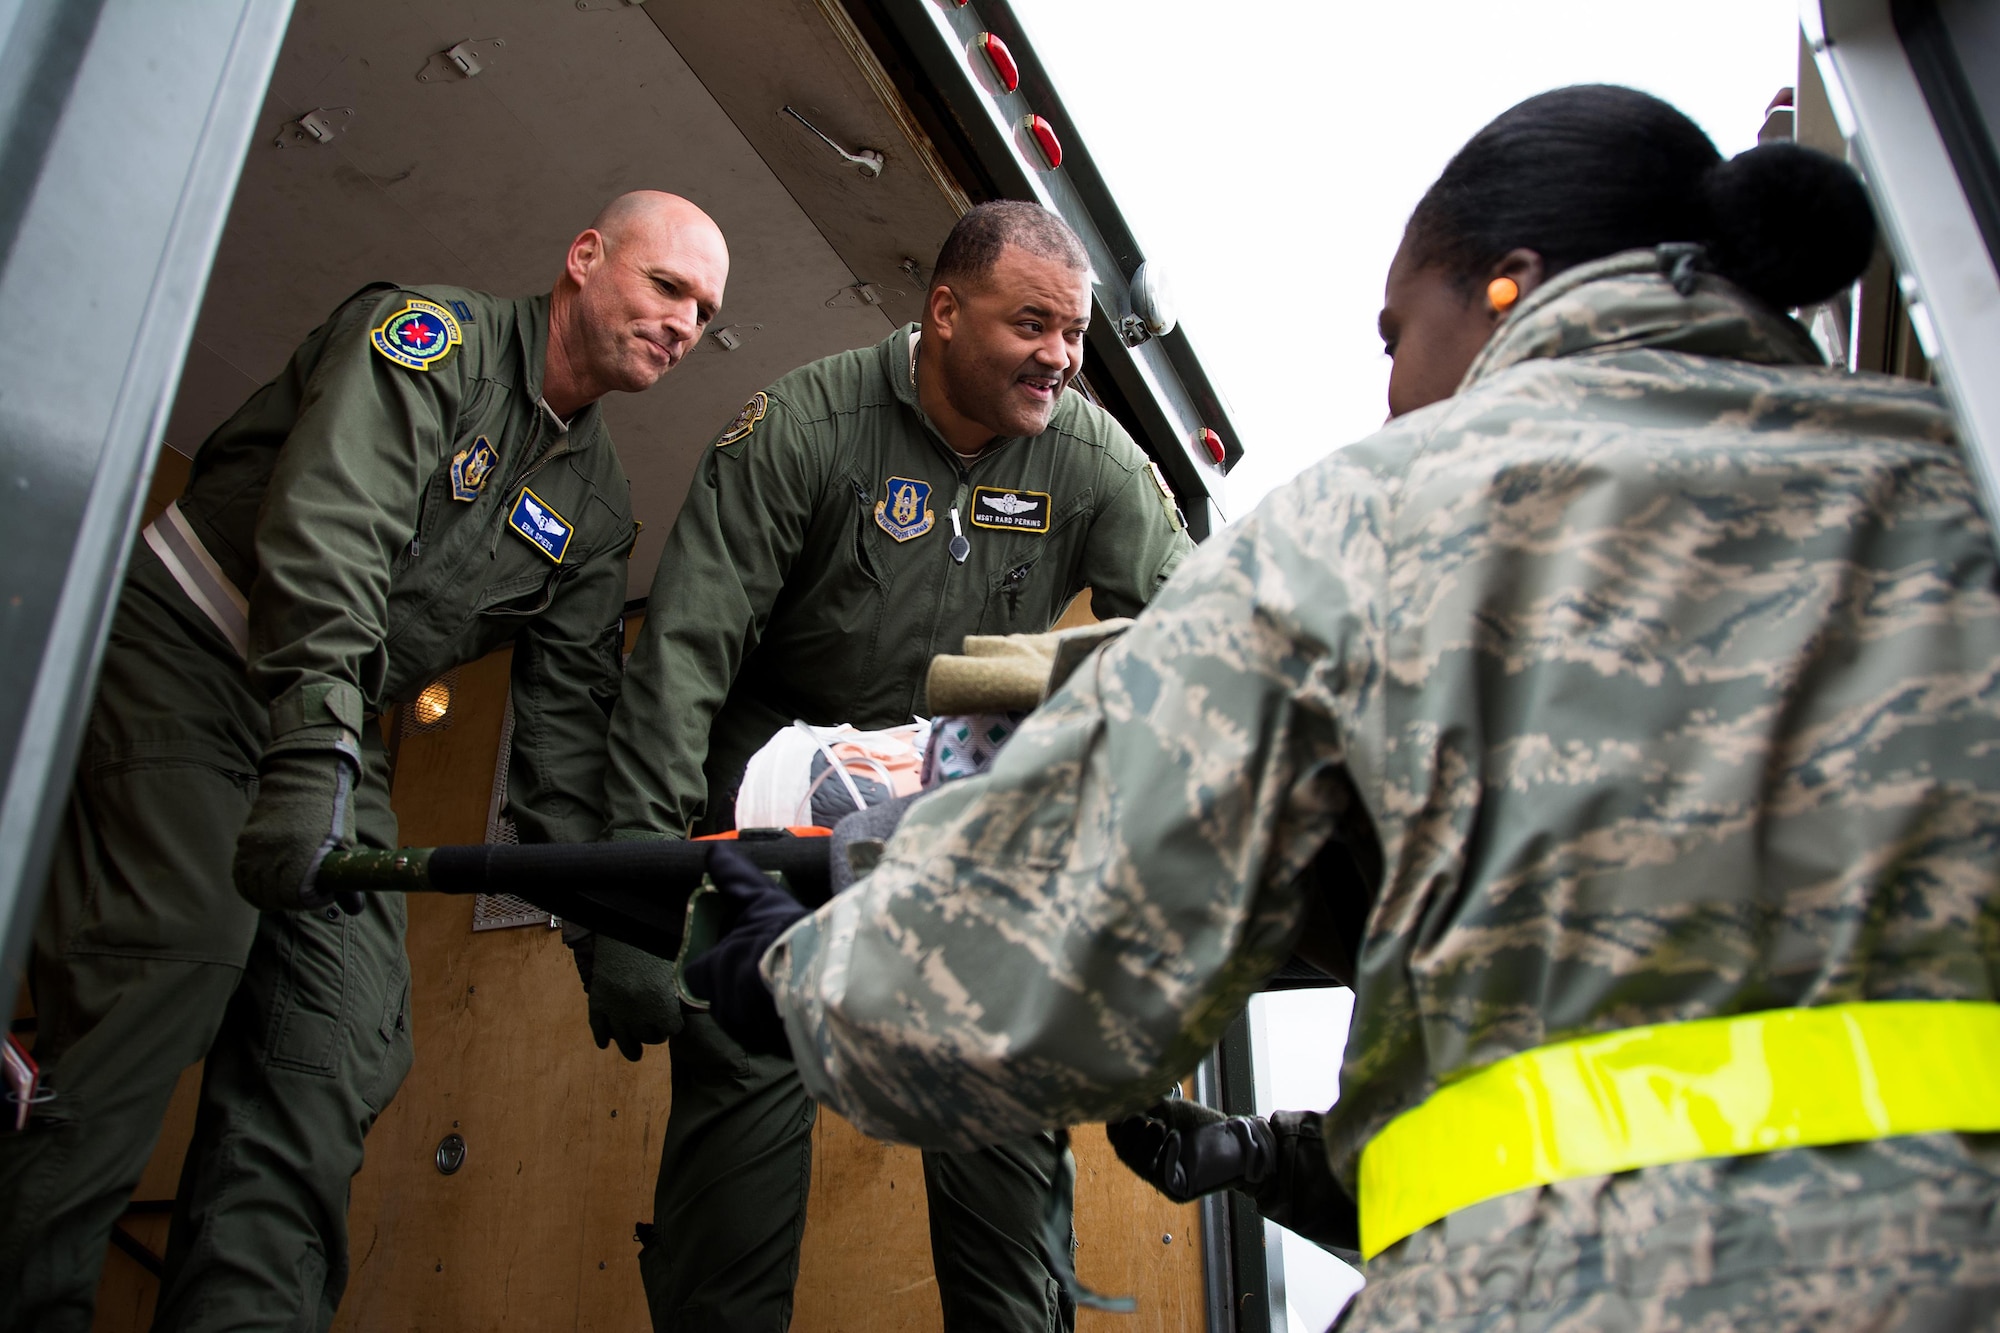 Capt. Erik Spiess, 349th Aeromedical Evacuations Squadron flight nurse, and Master Sgt. Rard Perkins, 911th Operations Group aircrew trainer, hand off a patient to members of the 60th Inpatient Squadron to secure on an ambulance bus for delivery to David Grant U.S. Air Force Medical Center at Travis Air Force Base, Calif., on March 24, 2017. Members of the 60th IPTS participated in the Air Force Reserve exercise Patriot Delta, providing enroute patient care and staging the medical manikins. (U.S. Air Force photo by Staff Sgt. Daniel Phelps)